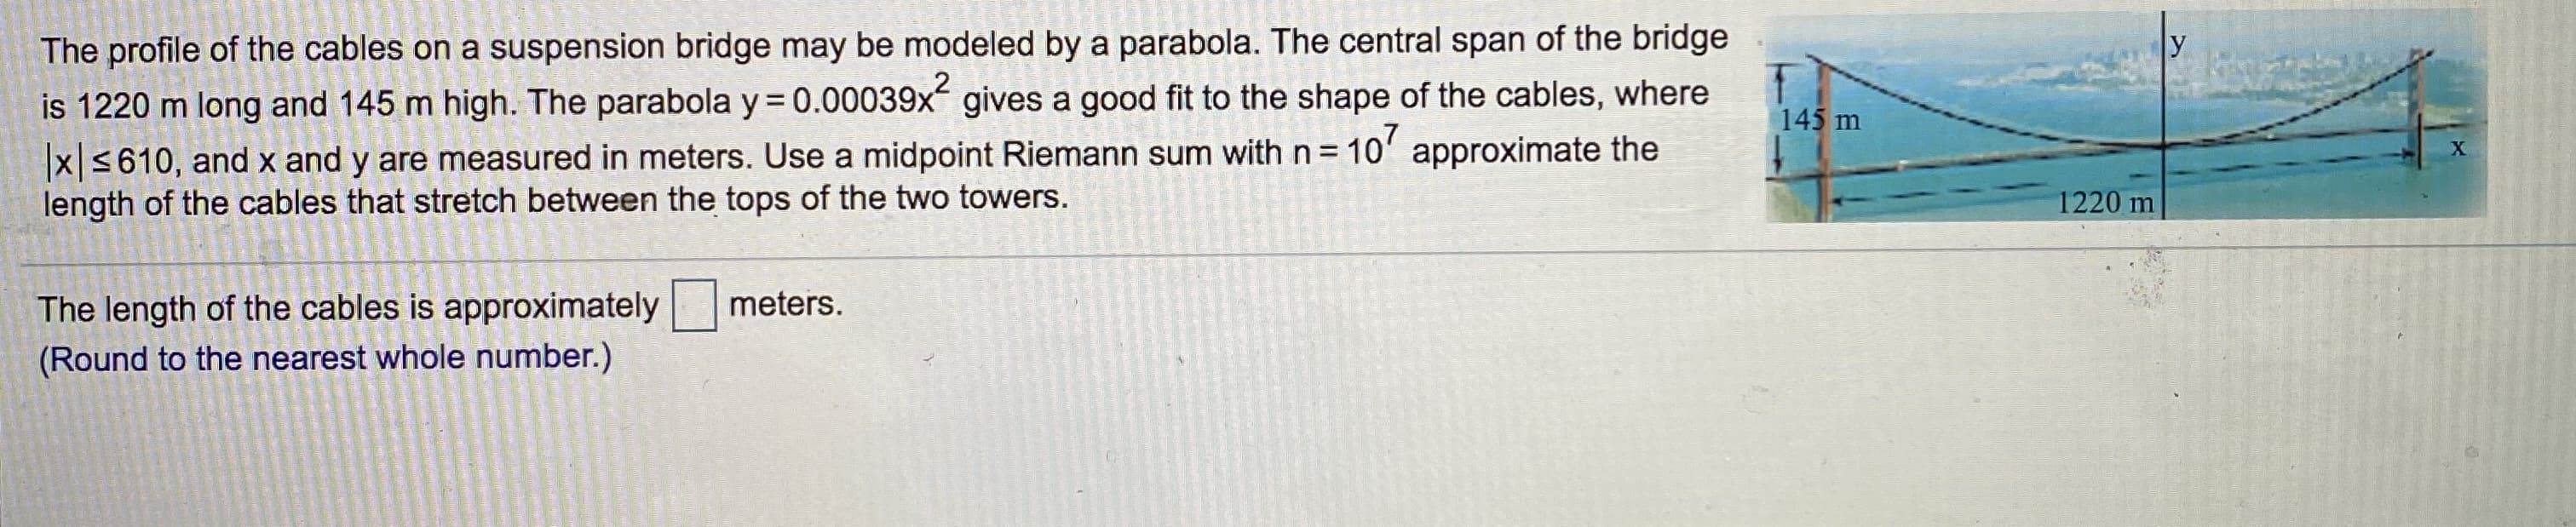 The profile of the cables on a suspension bridge may be modeled by a parabola. The central span of the bridge
is 1220 m long and 145 m high. The parabola y=0.00039x gives a good fit to the shape of the cables, where
x S610, and x and y are measured in meters. Use a midpoint Riemann sum with n = 10' approximate the
length of the cables that stretch between the tops of the two towers.
%3D
The lenath of the cables is approximately
meters.
